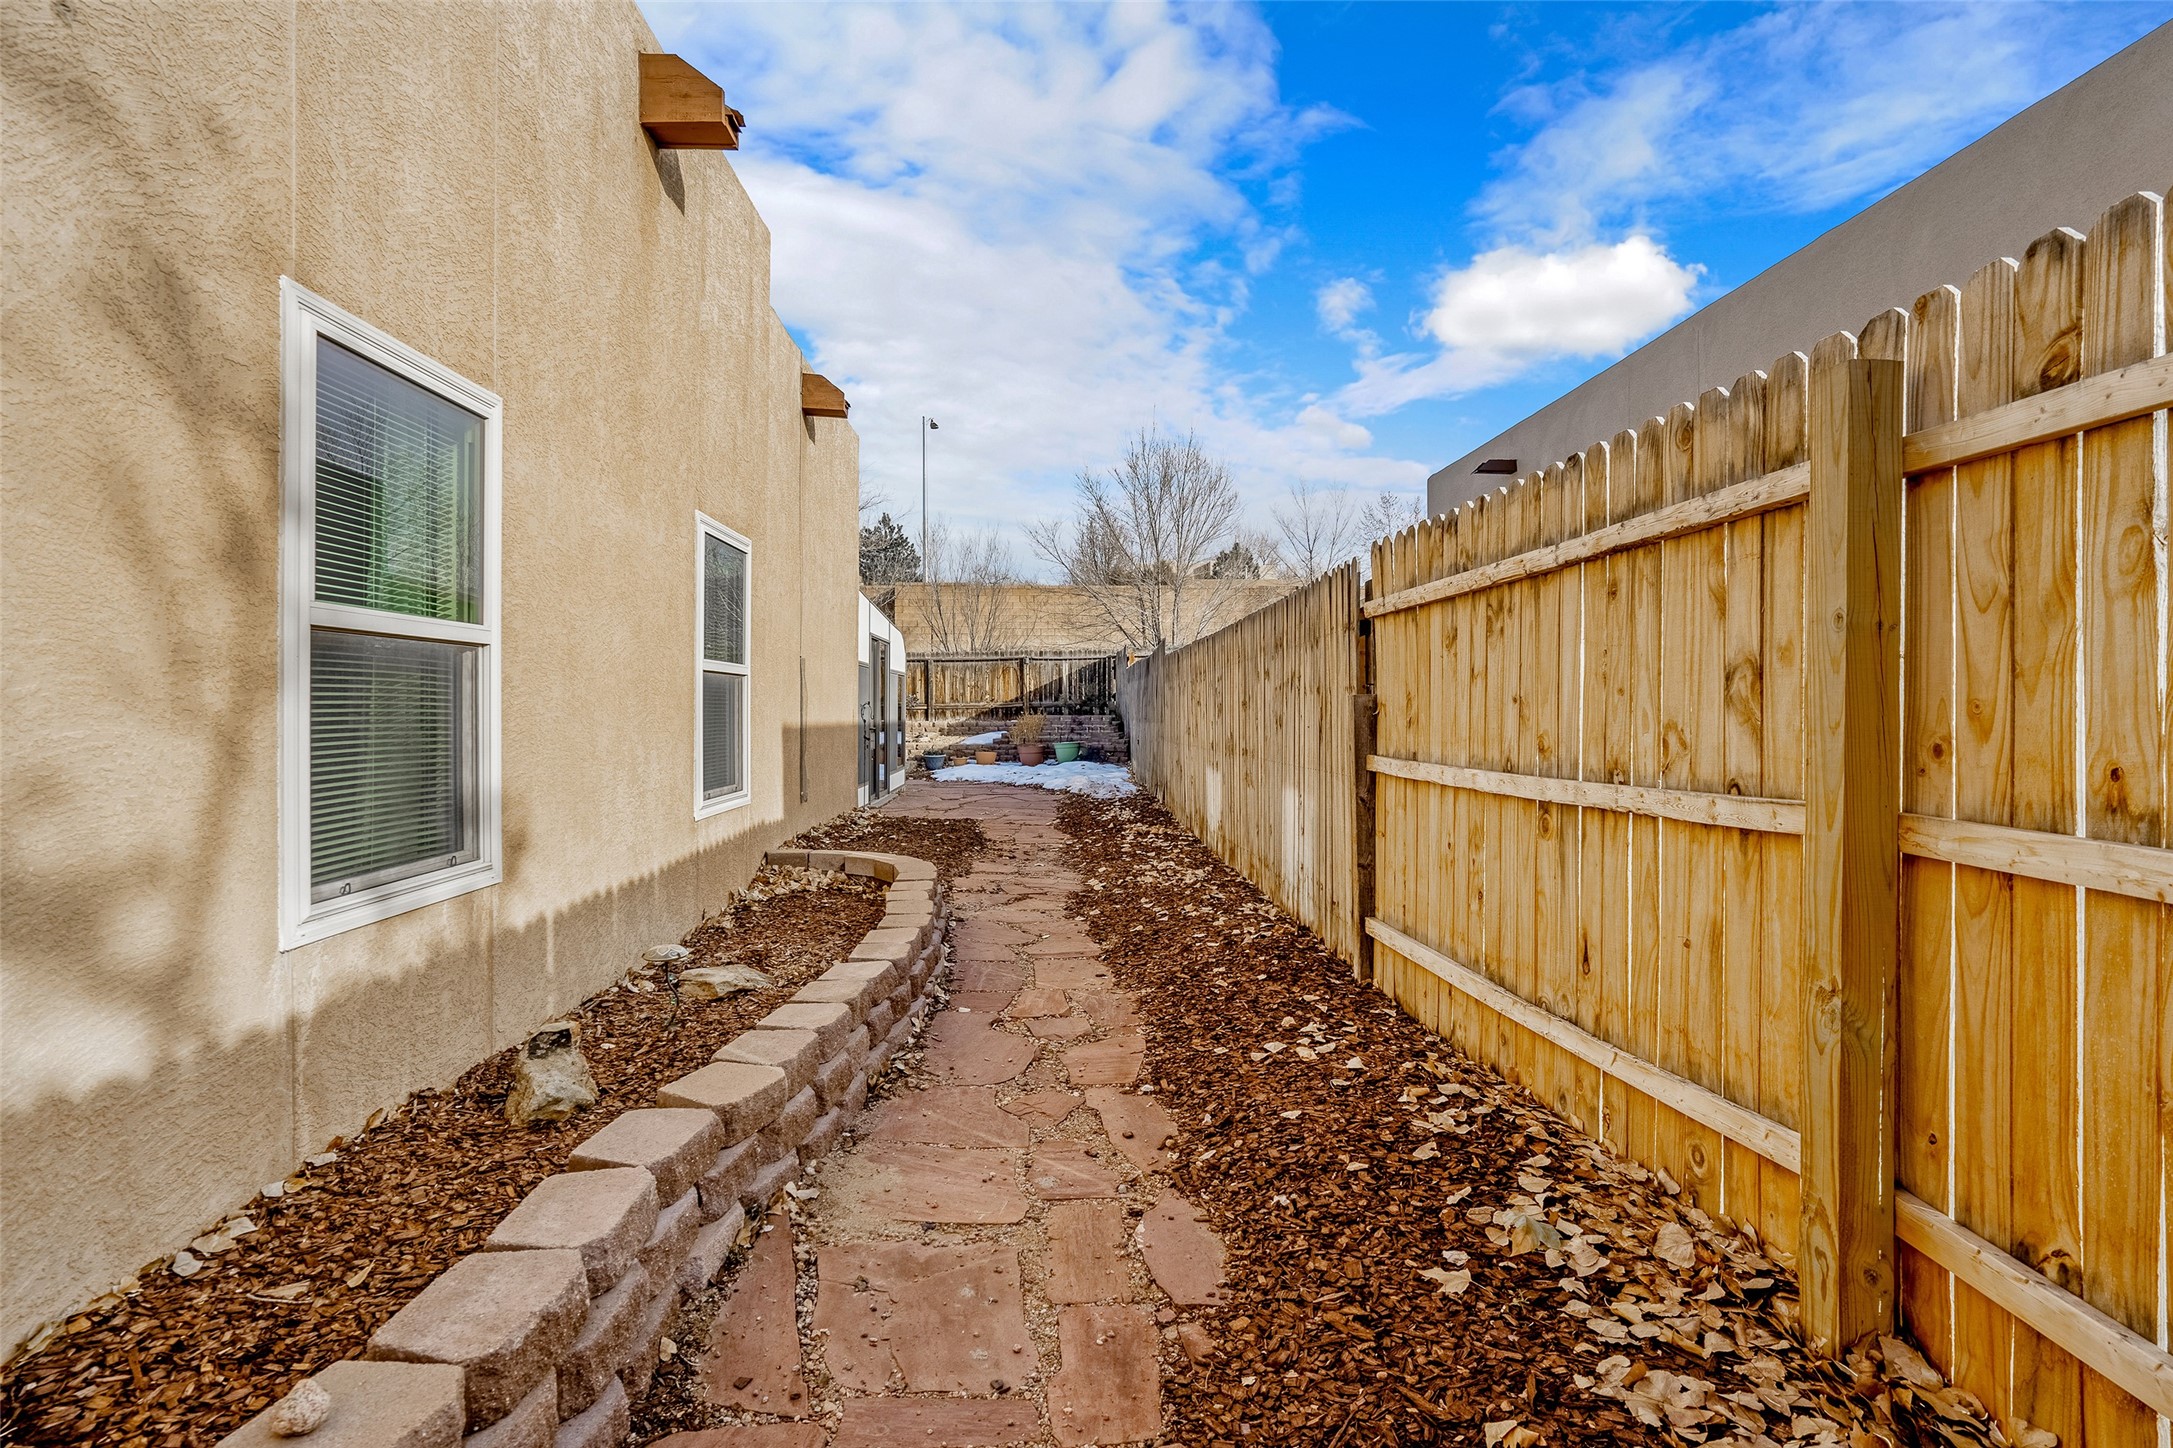 4120 Cheyenne Circle, Santa Fe, New Mexico 87507, 3 Bedrooms Bedrooms, ,2 BathroomsBathrooms,Residential,For Sale,4120 Cheyenne Circle,202341471